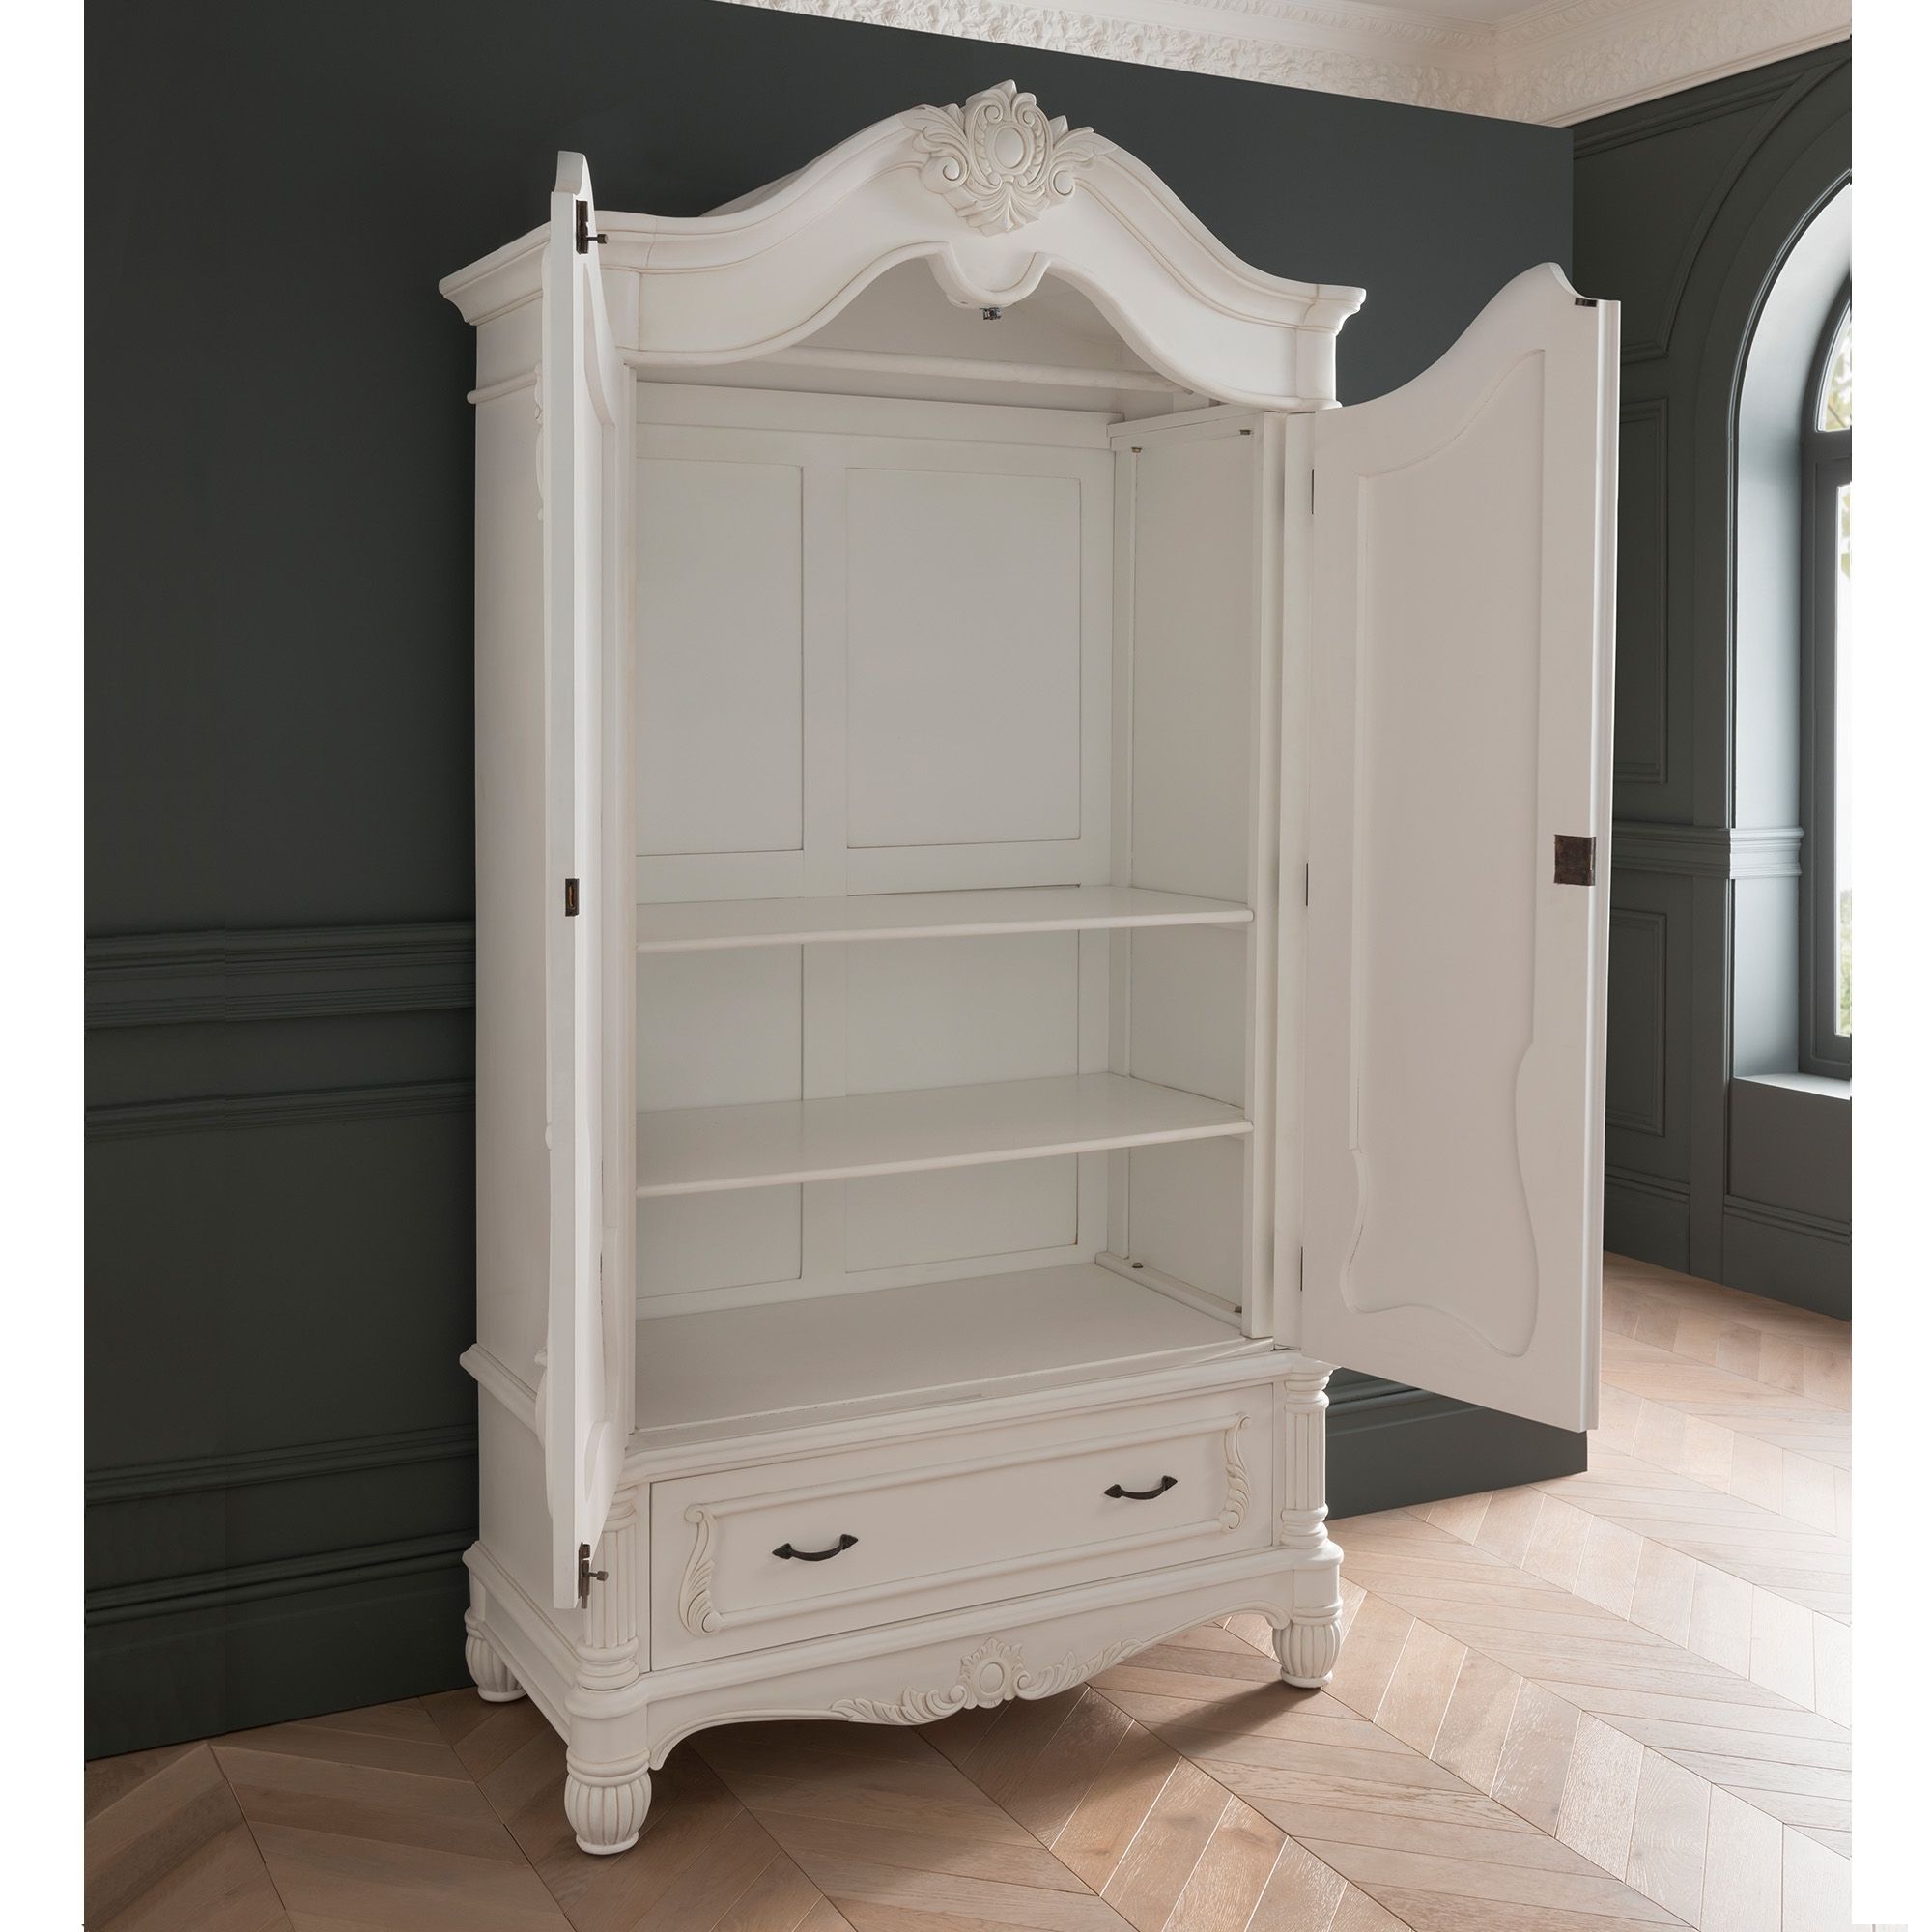 Antique French Style White Finished 1 Drawer Wardrobe | Homesdirect365 Within Antique Single Wardrobes (Gallery 16 of 20)